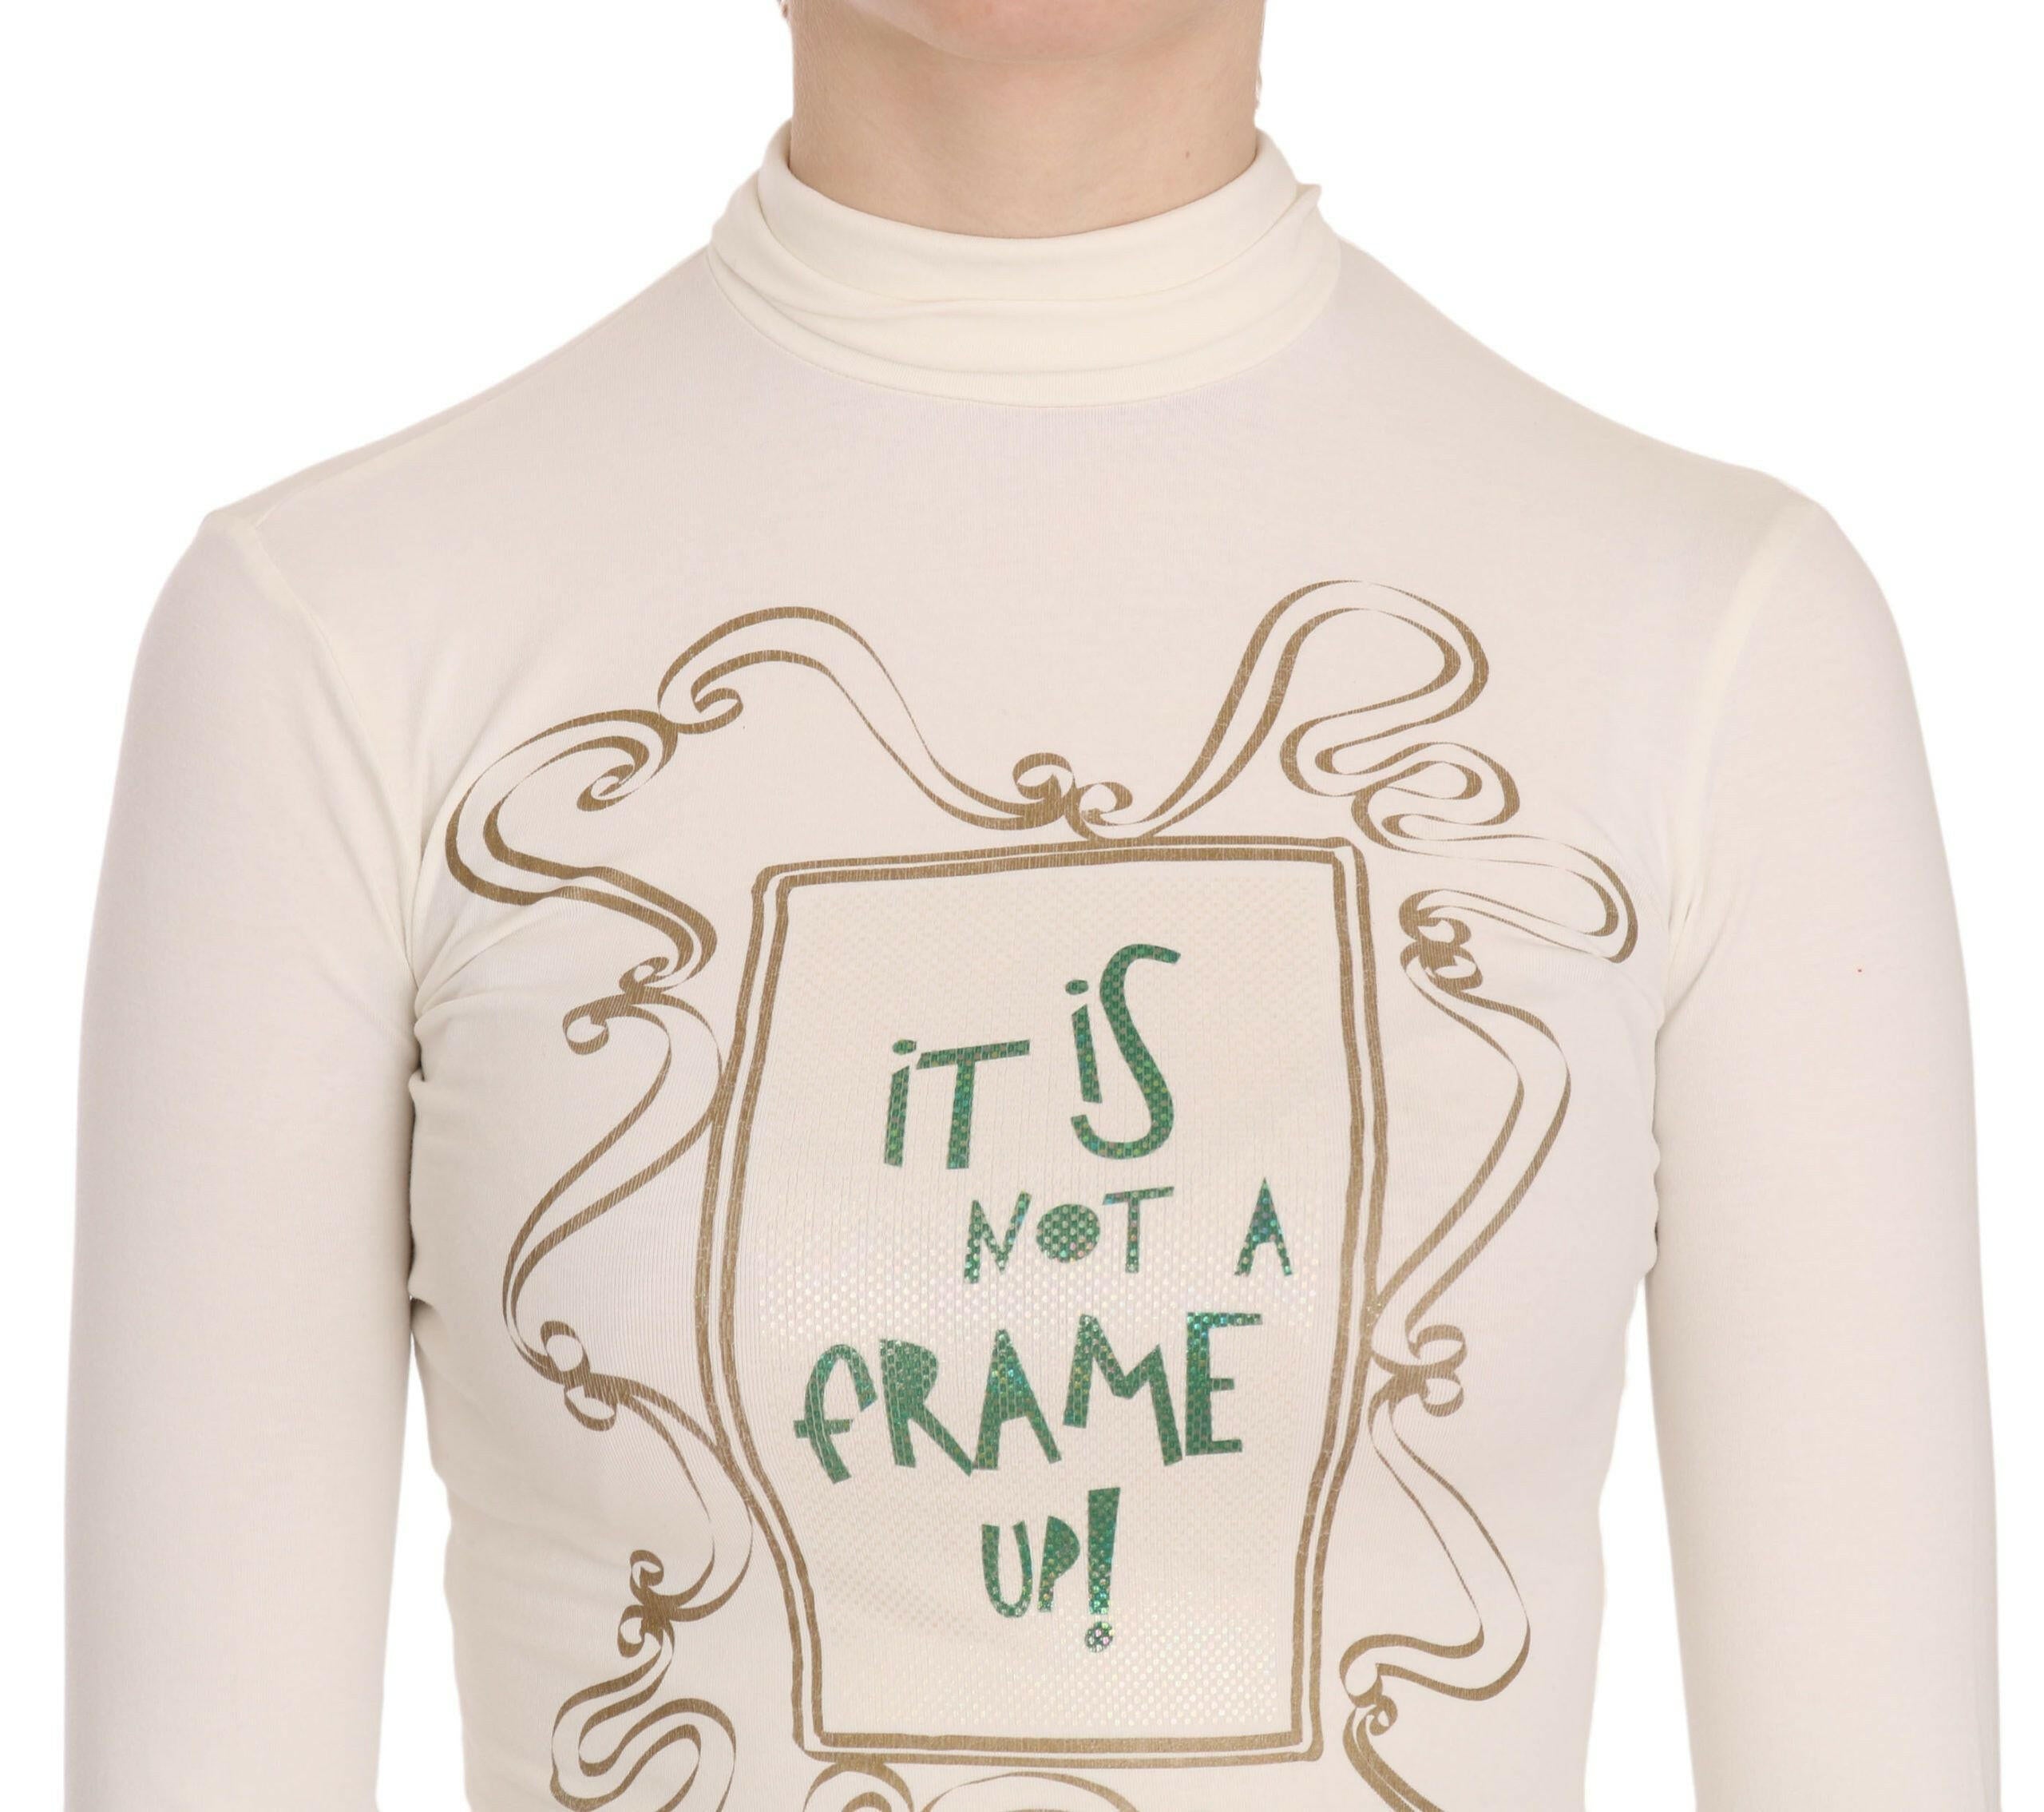 Exte Crew Neck It Is Not A Frame Up! Print Blouse - GENUINE AUTHENTIC BRAND LLC  